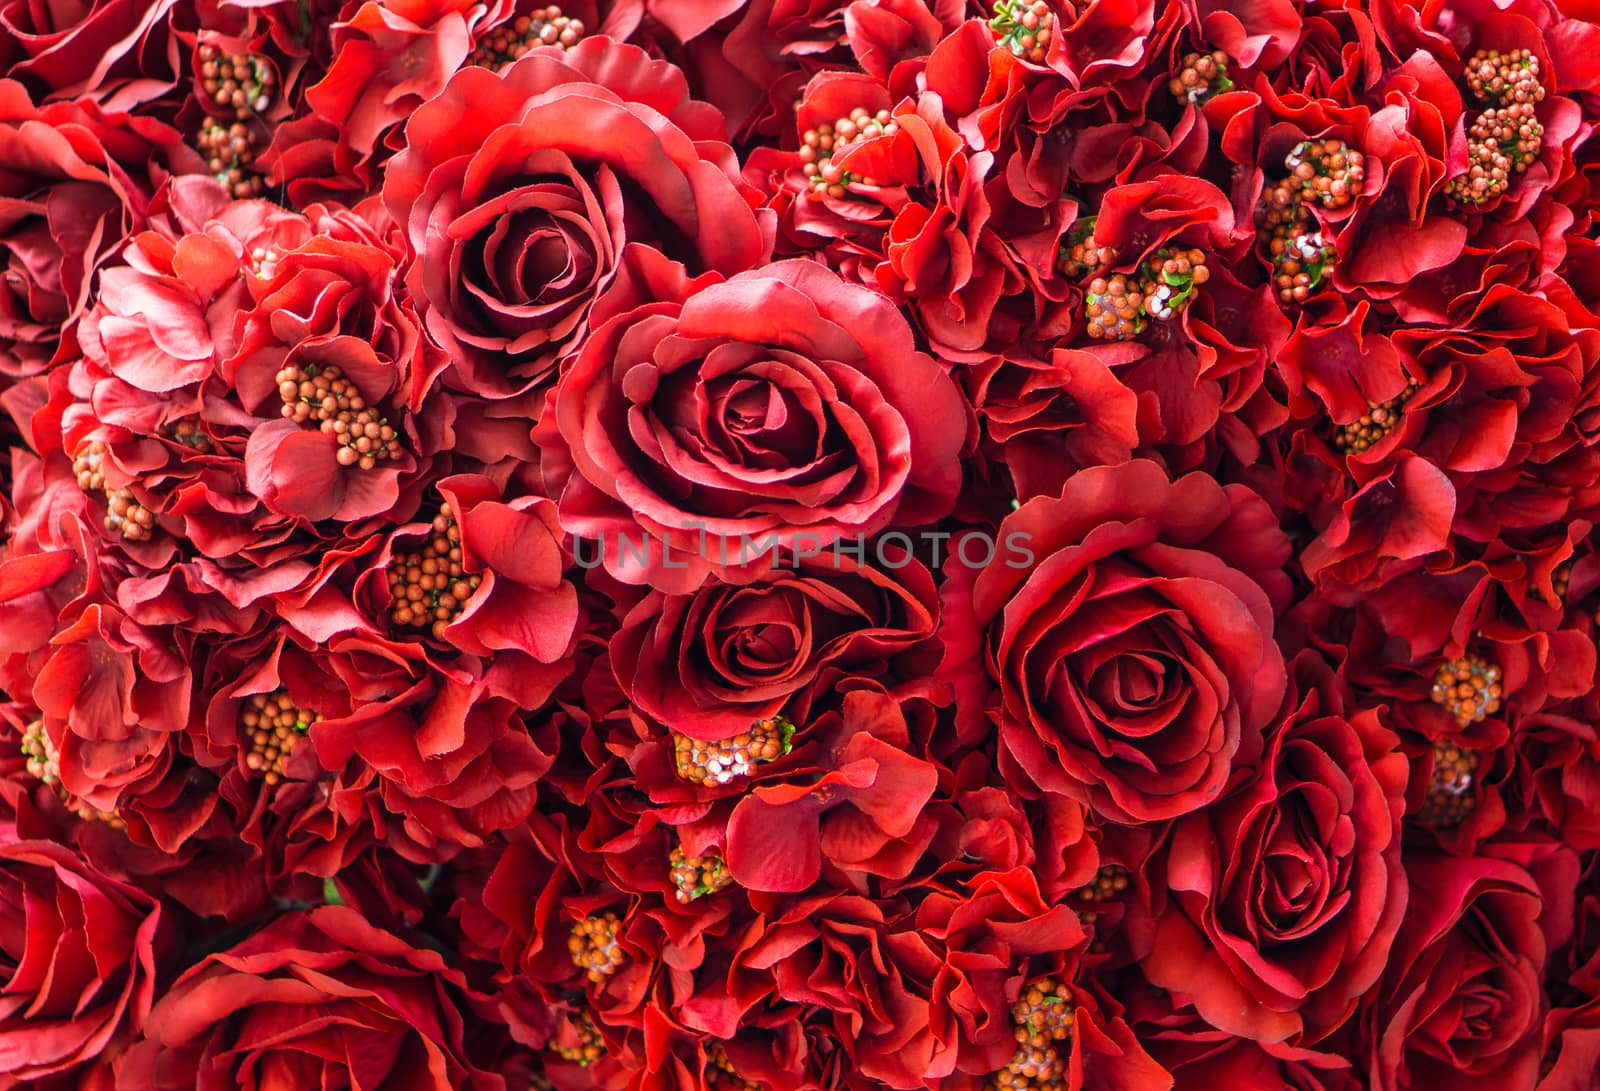 Many of Red roses flowers background, High Angle View